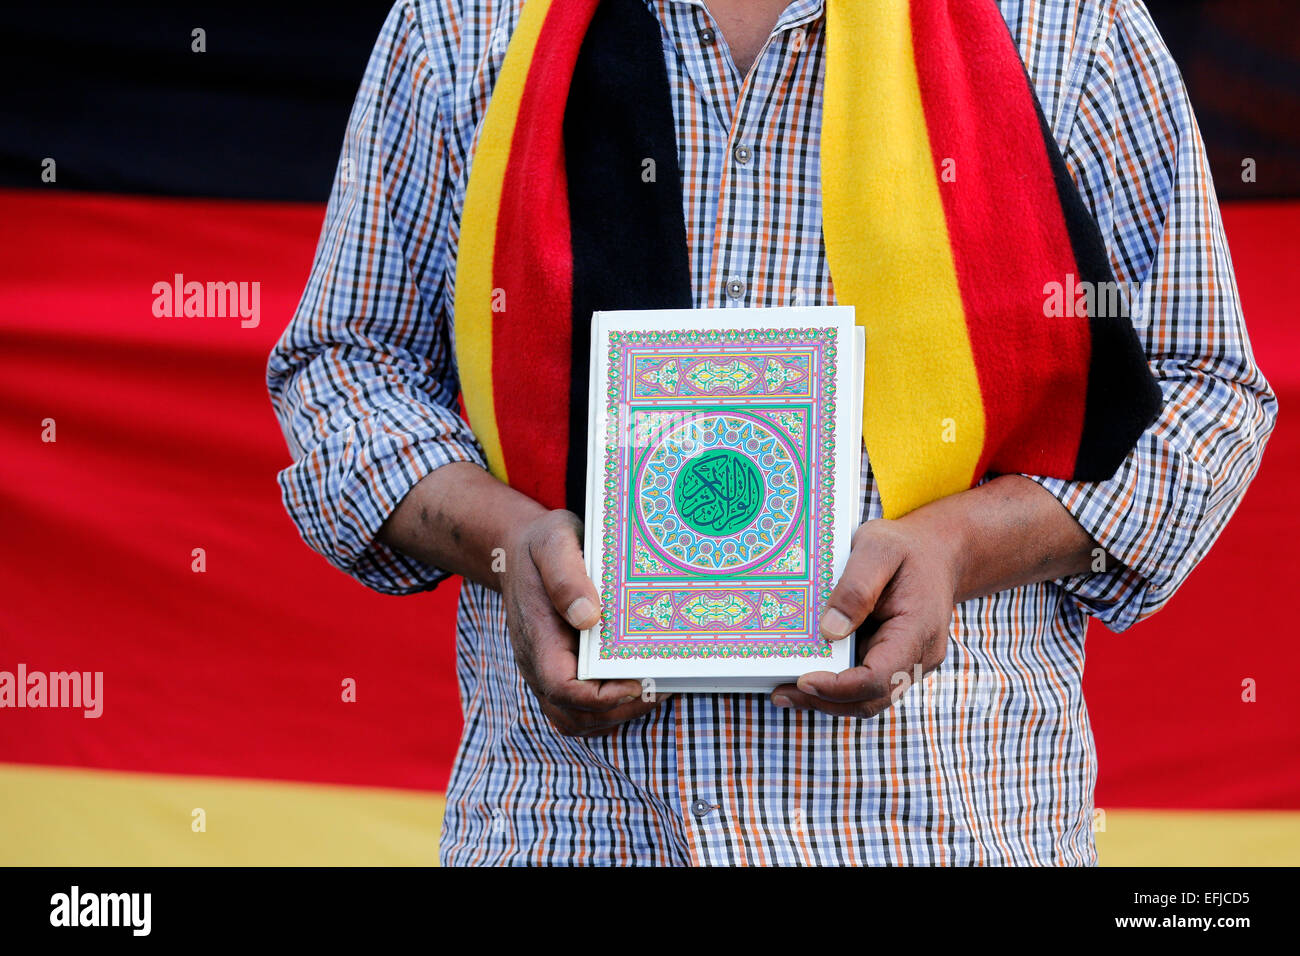 Turkish man wearing scarf in German flags colors (black red gold) keeps the Koran, the holy book of the Muslims in his hands. Dortmund/Germany Stock Photo